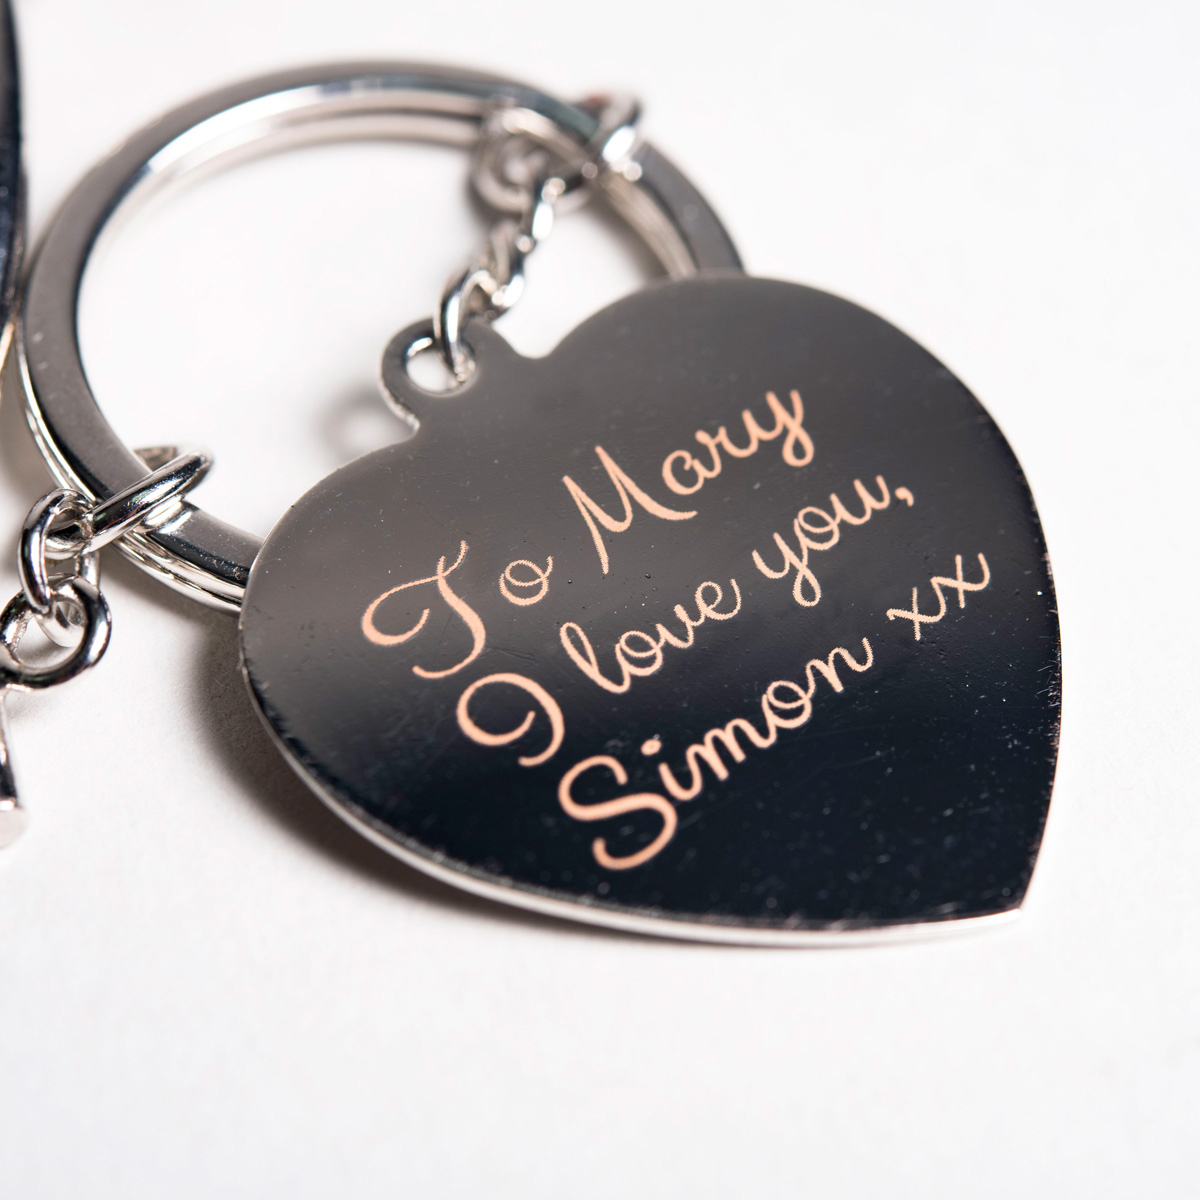 Personalised Engraved Key Ring - Silver Plated Rose